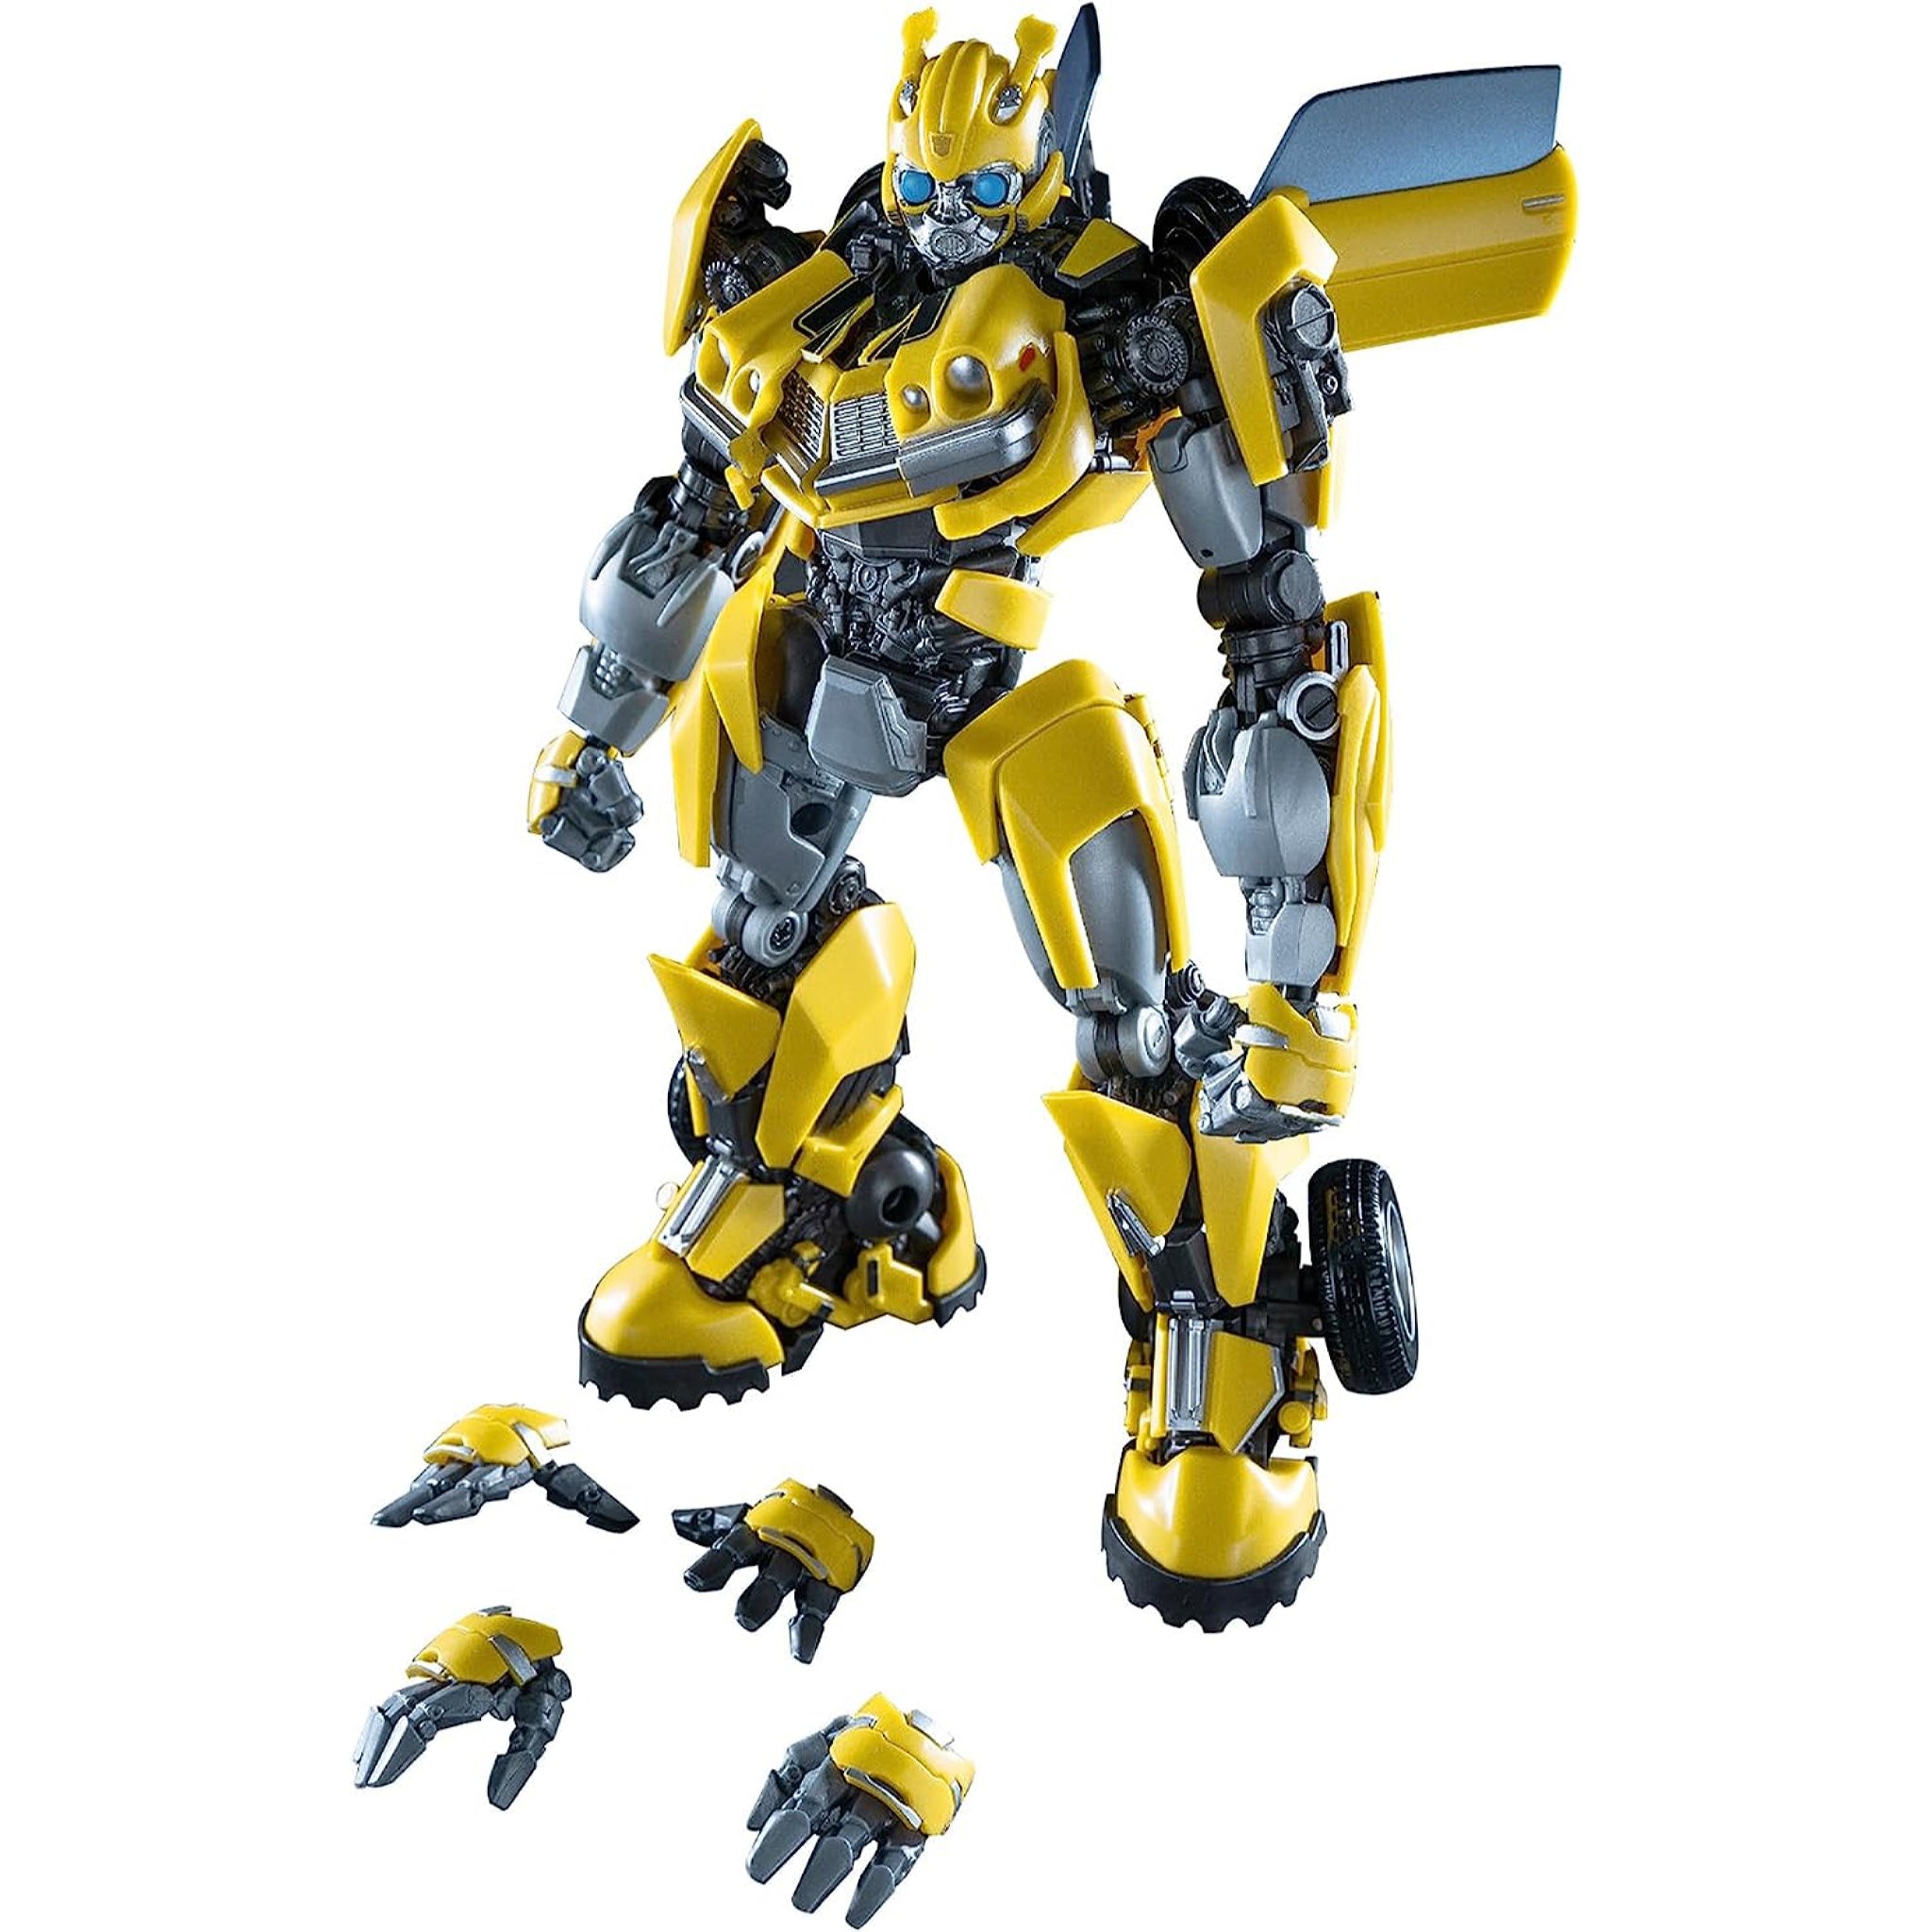 YoloPark Transformers Rise of the Beasts Bumblebee AMK Series Model Kit